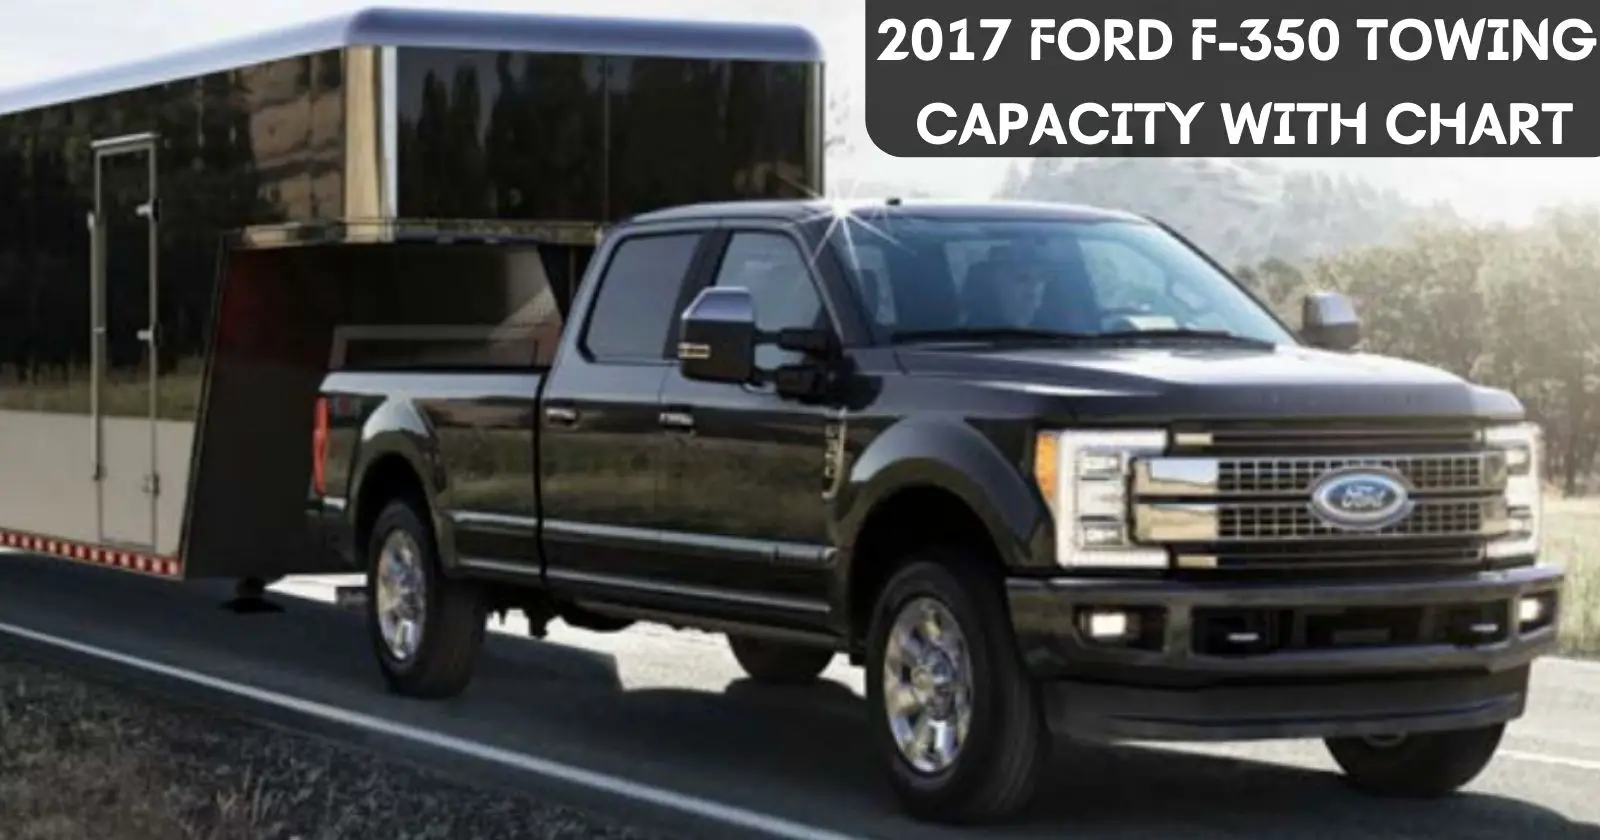 2017-ford-f-350-towing-capacity-thecartowing